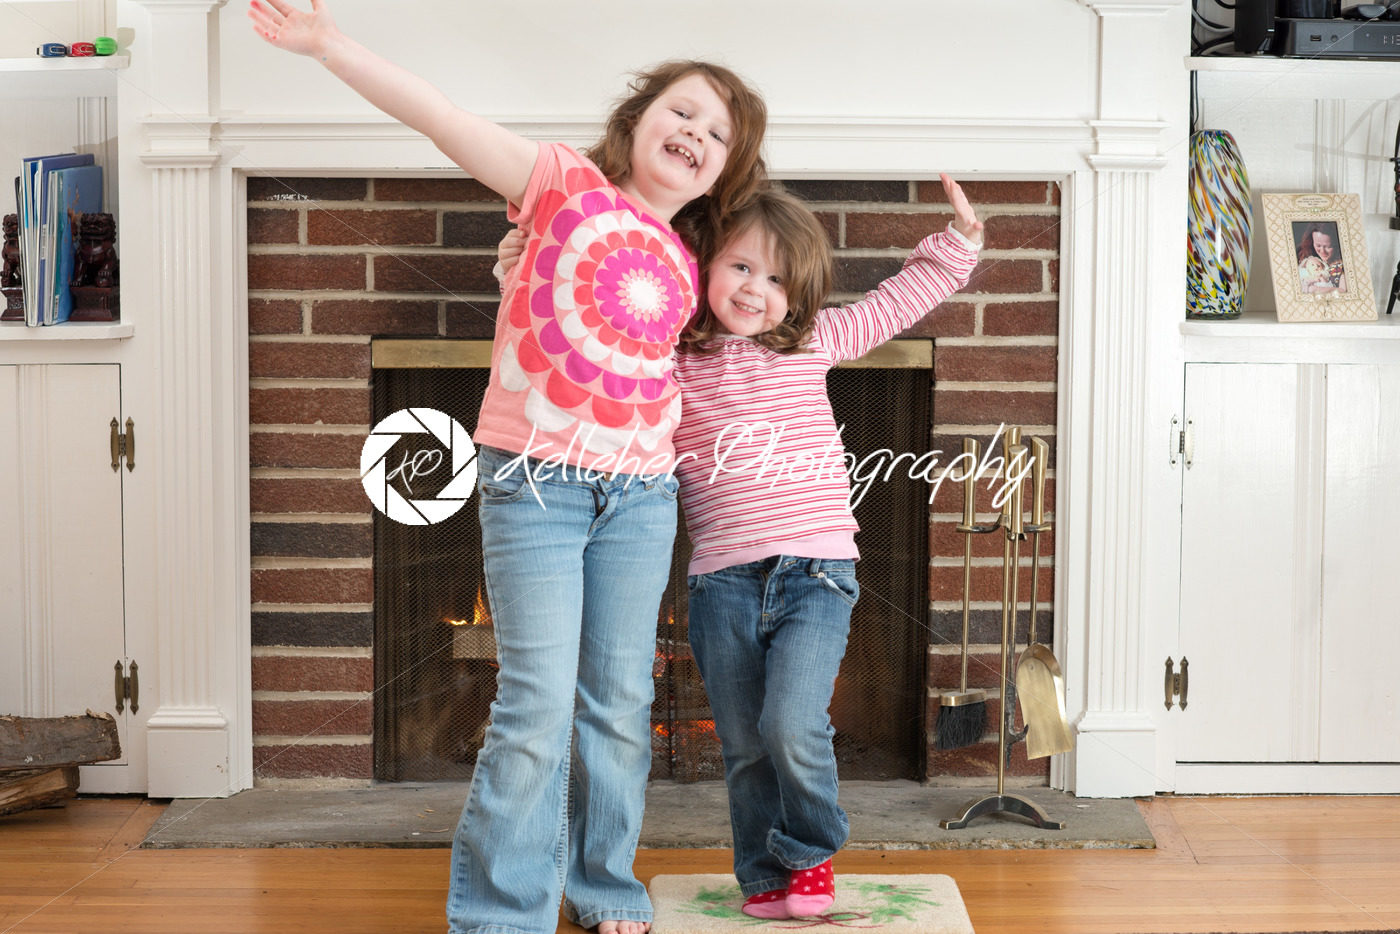 Portrait of a two young smiling sibling girls in front of a fireplace dressed for valentine’s day - Kelleher Photography Store